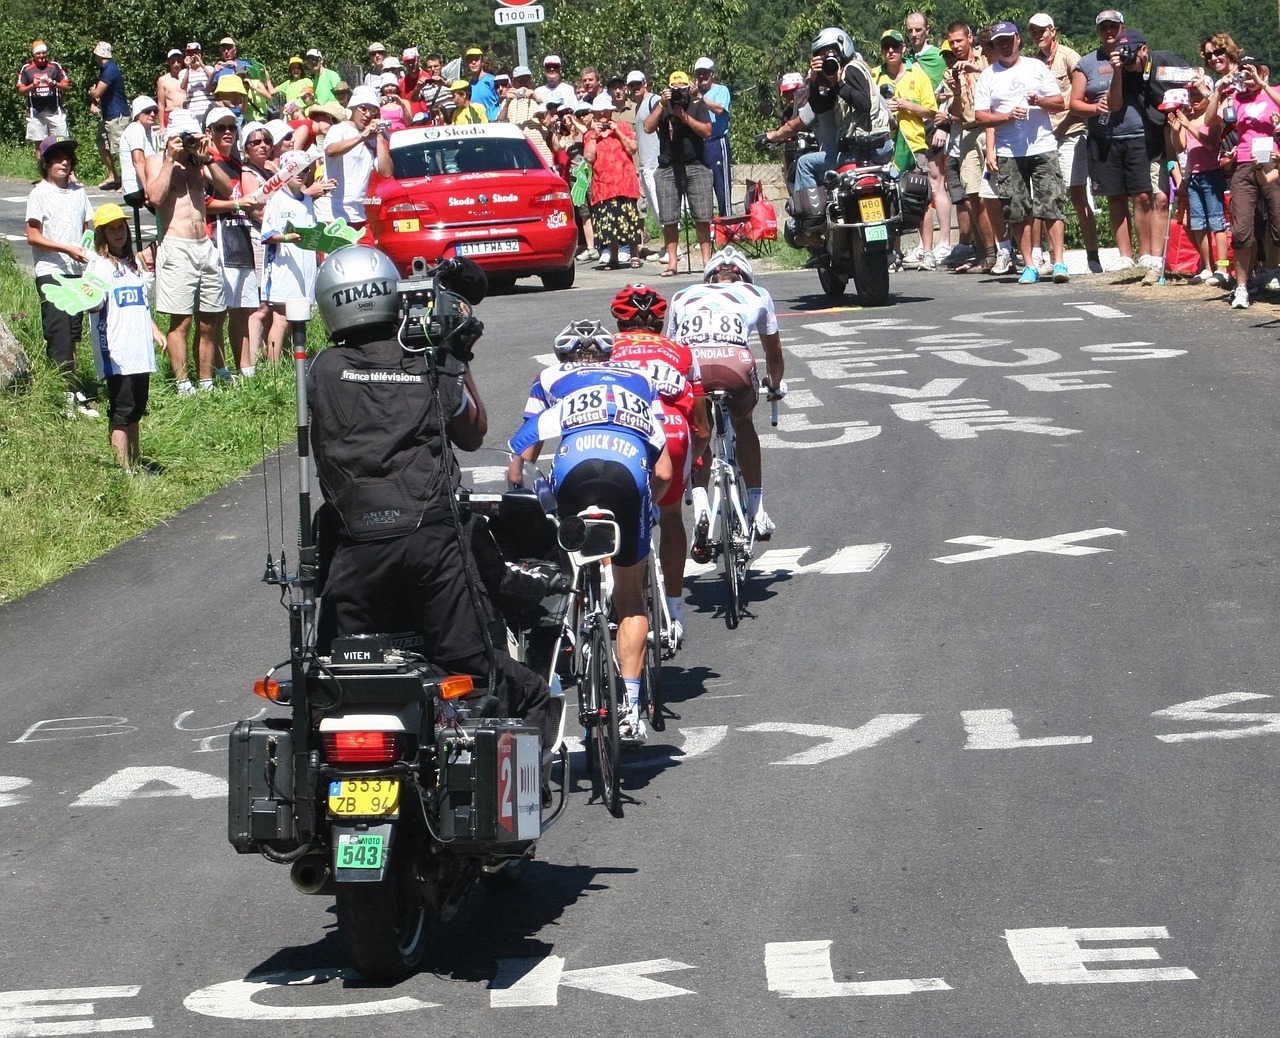 Riders at the Tour De France